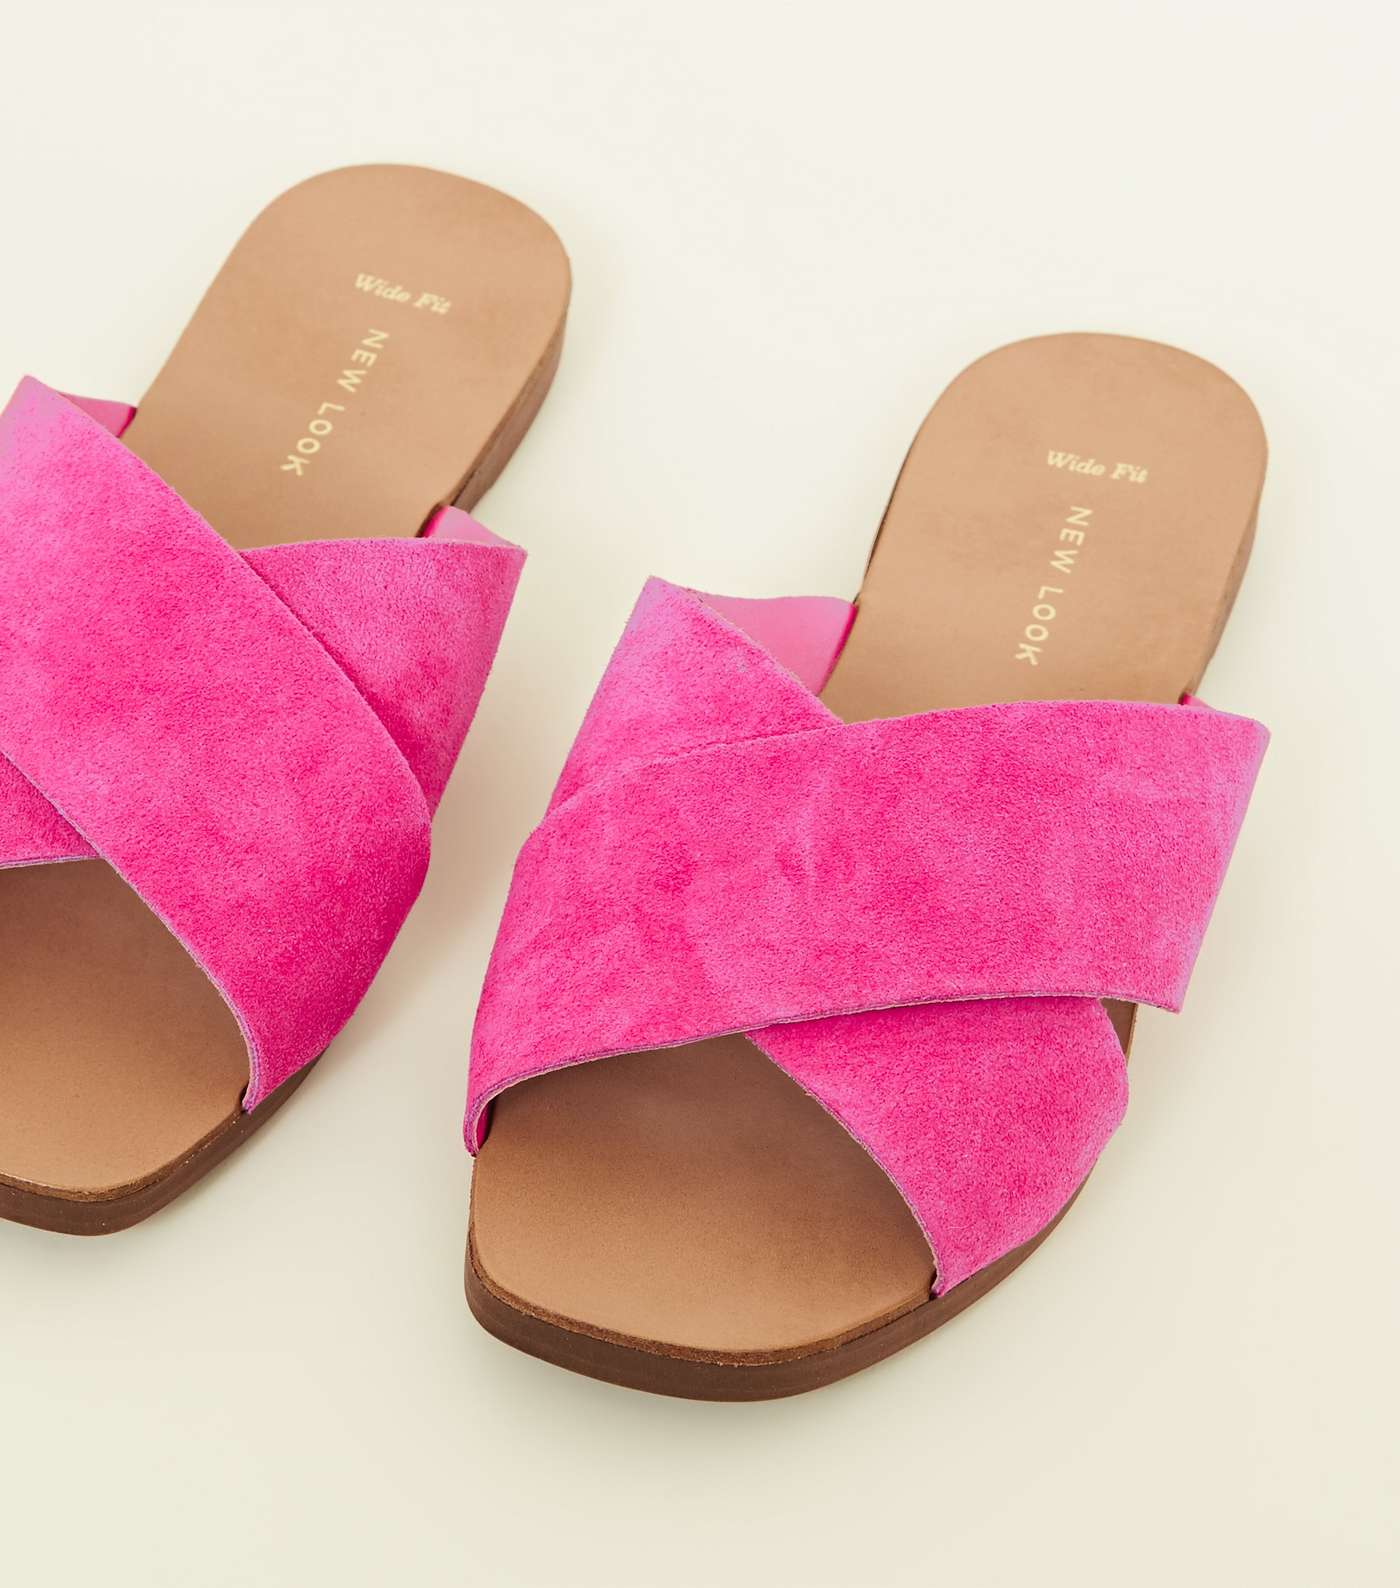 Wide Fit Bright Pink Suede Cross Strap Sliders Image 3